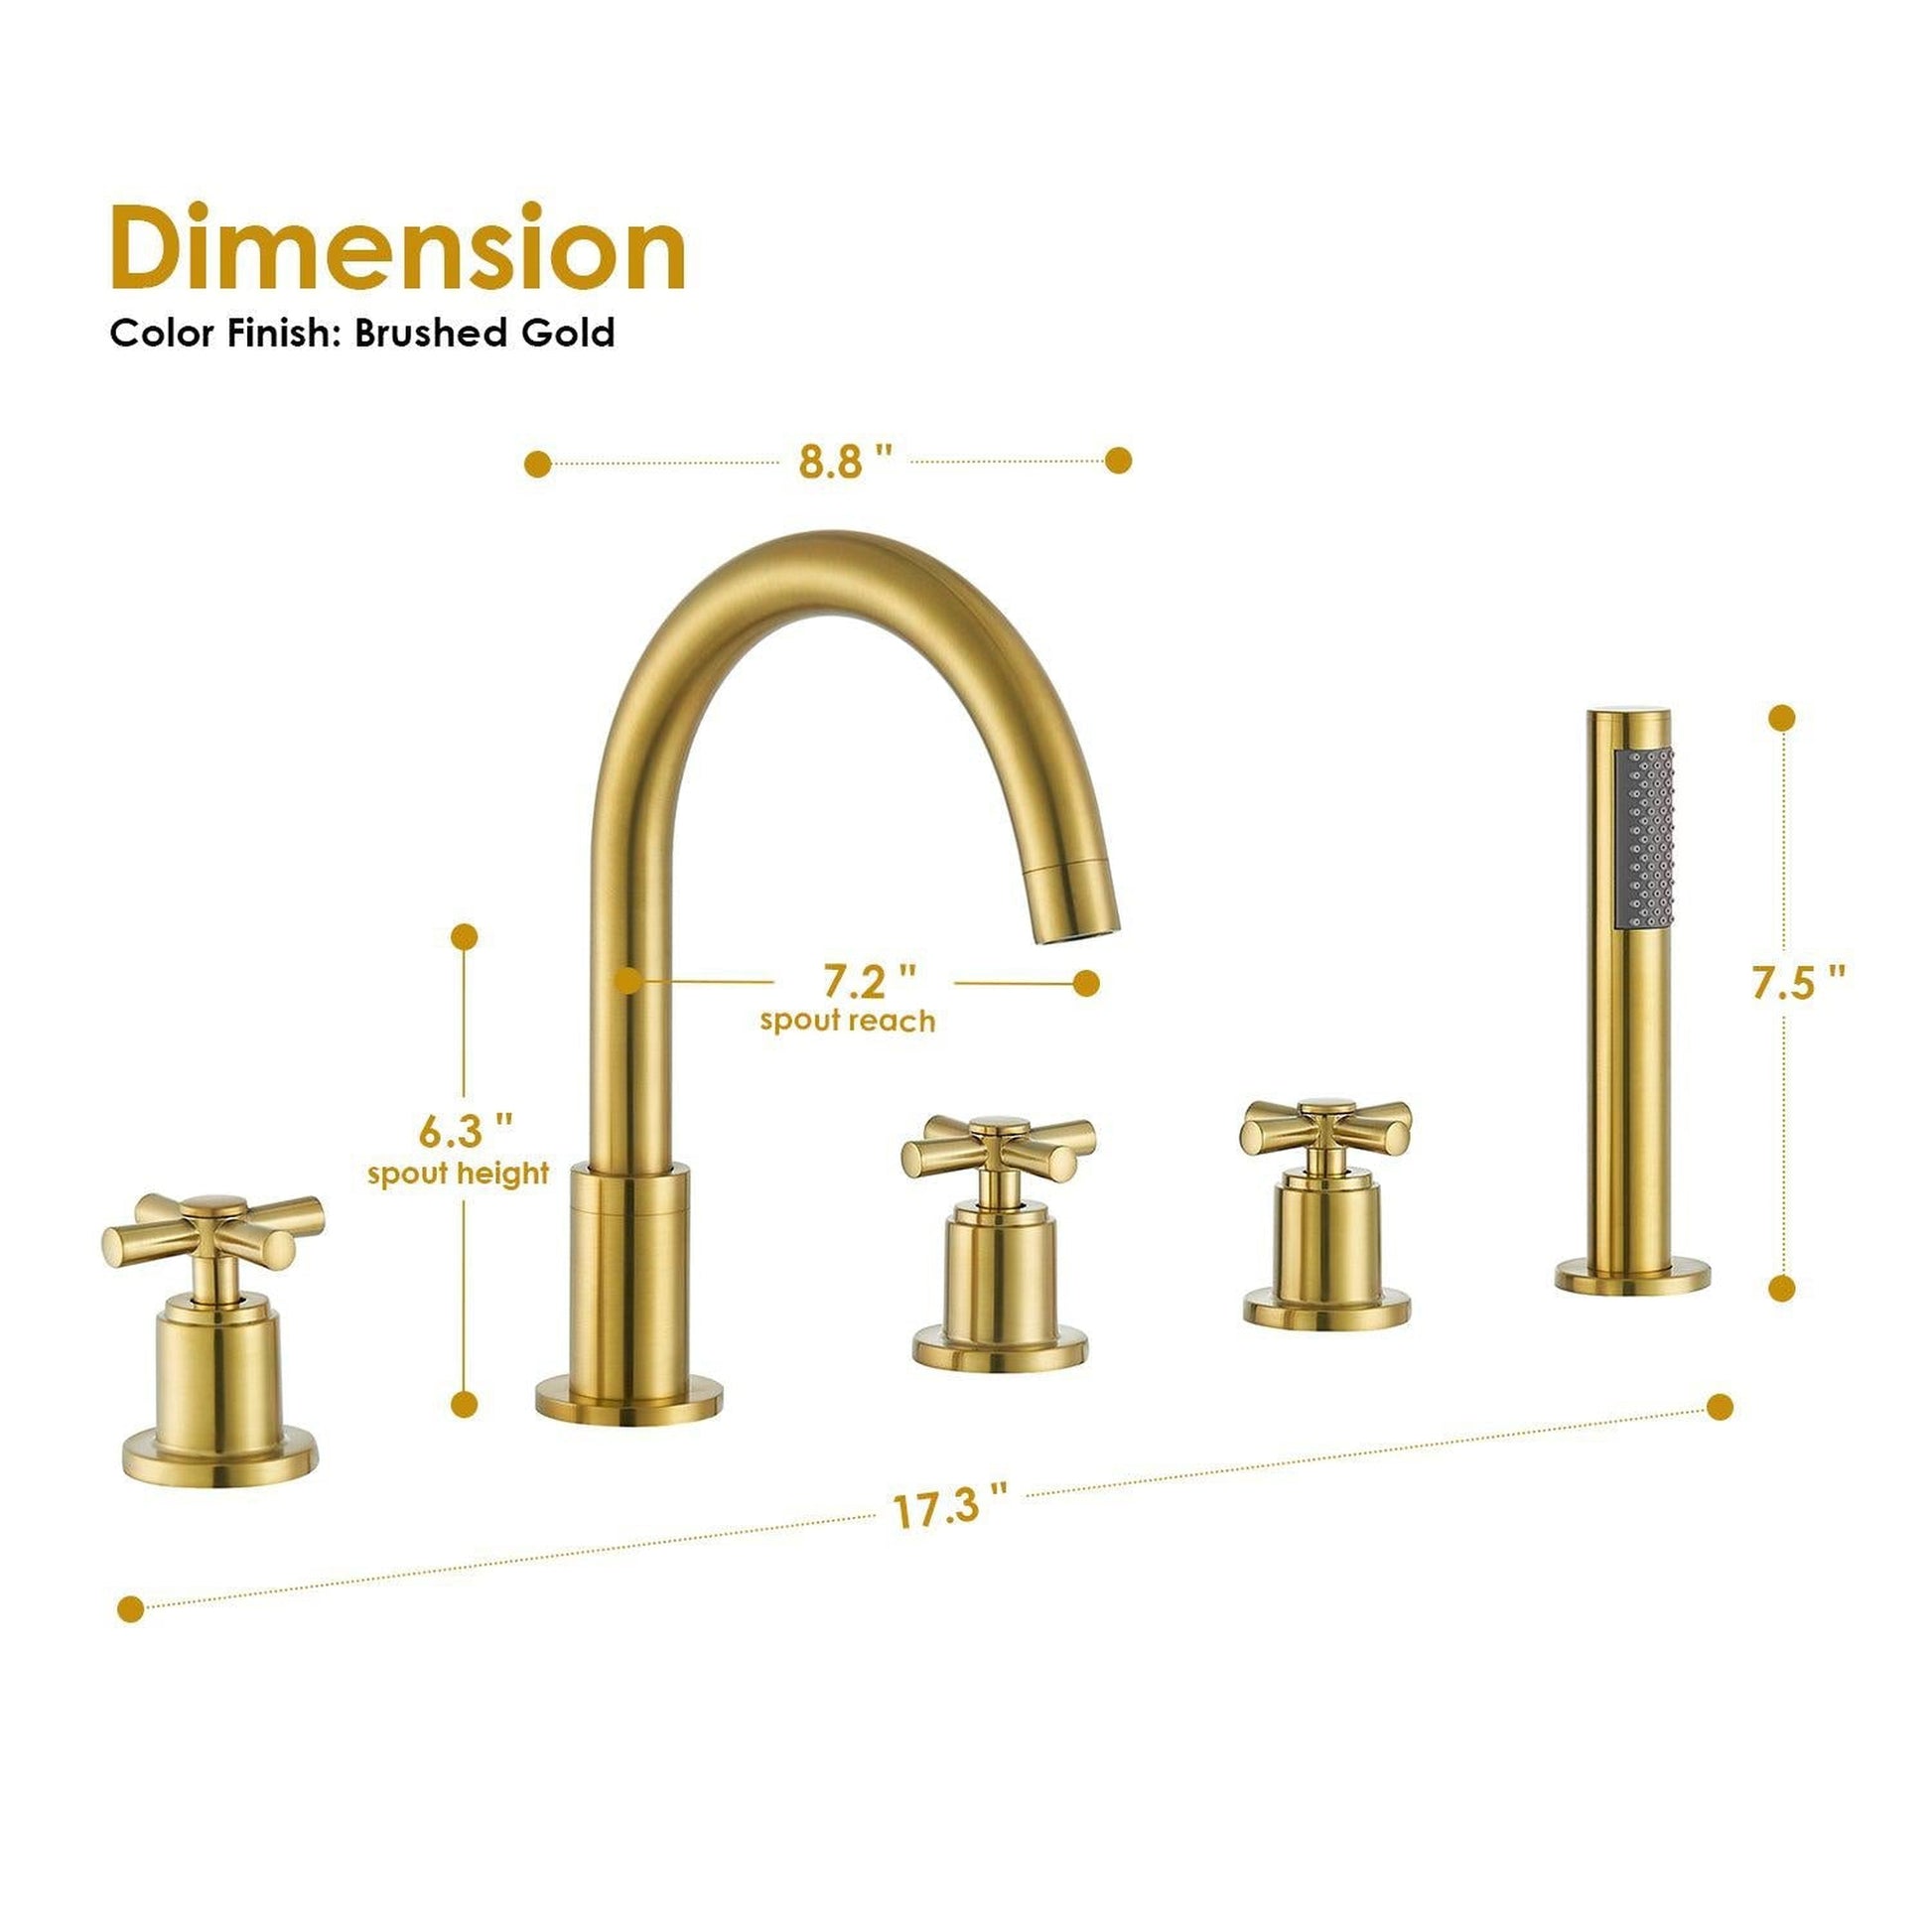 Altair Vikran Brushed Gold Triple Handle Deck-mounted Bathtub Faucet With Handshower